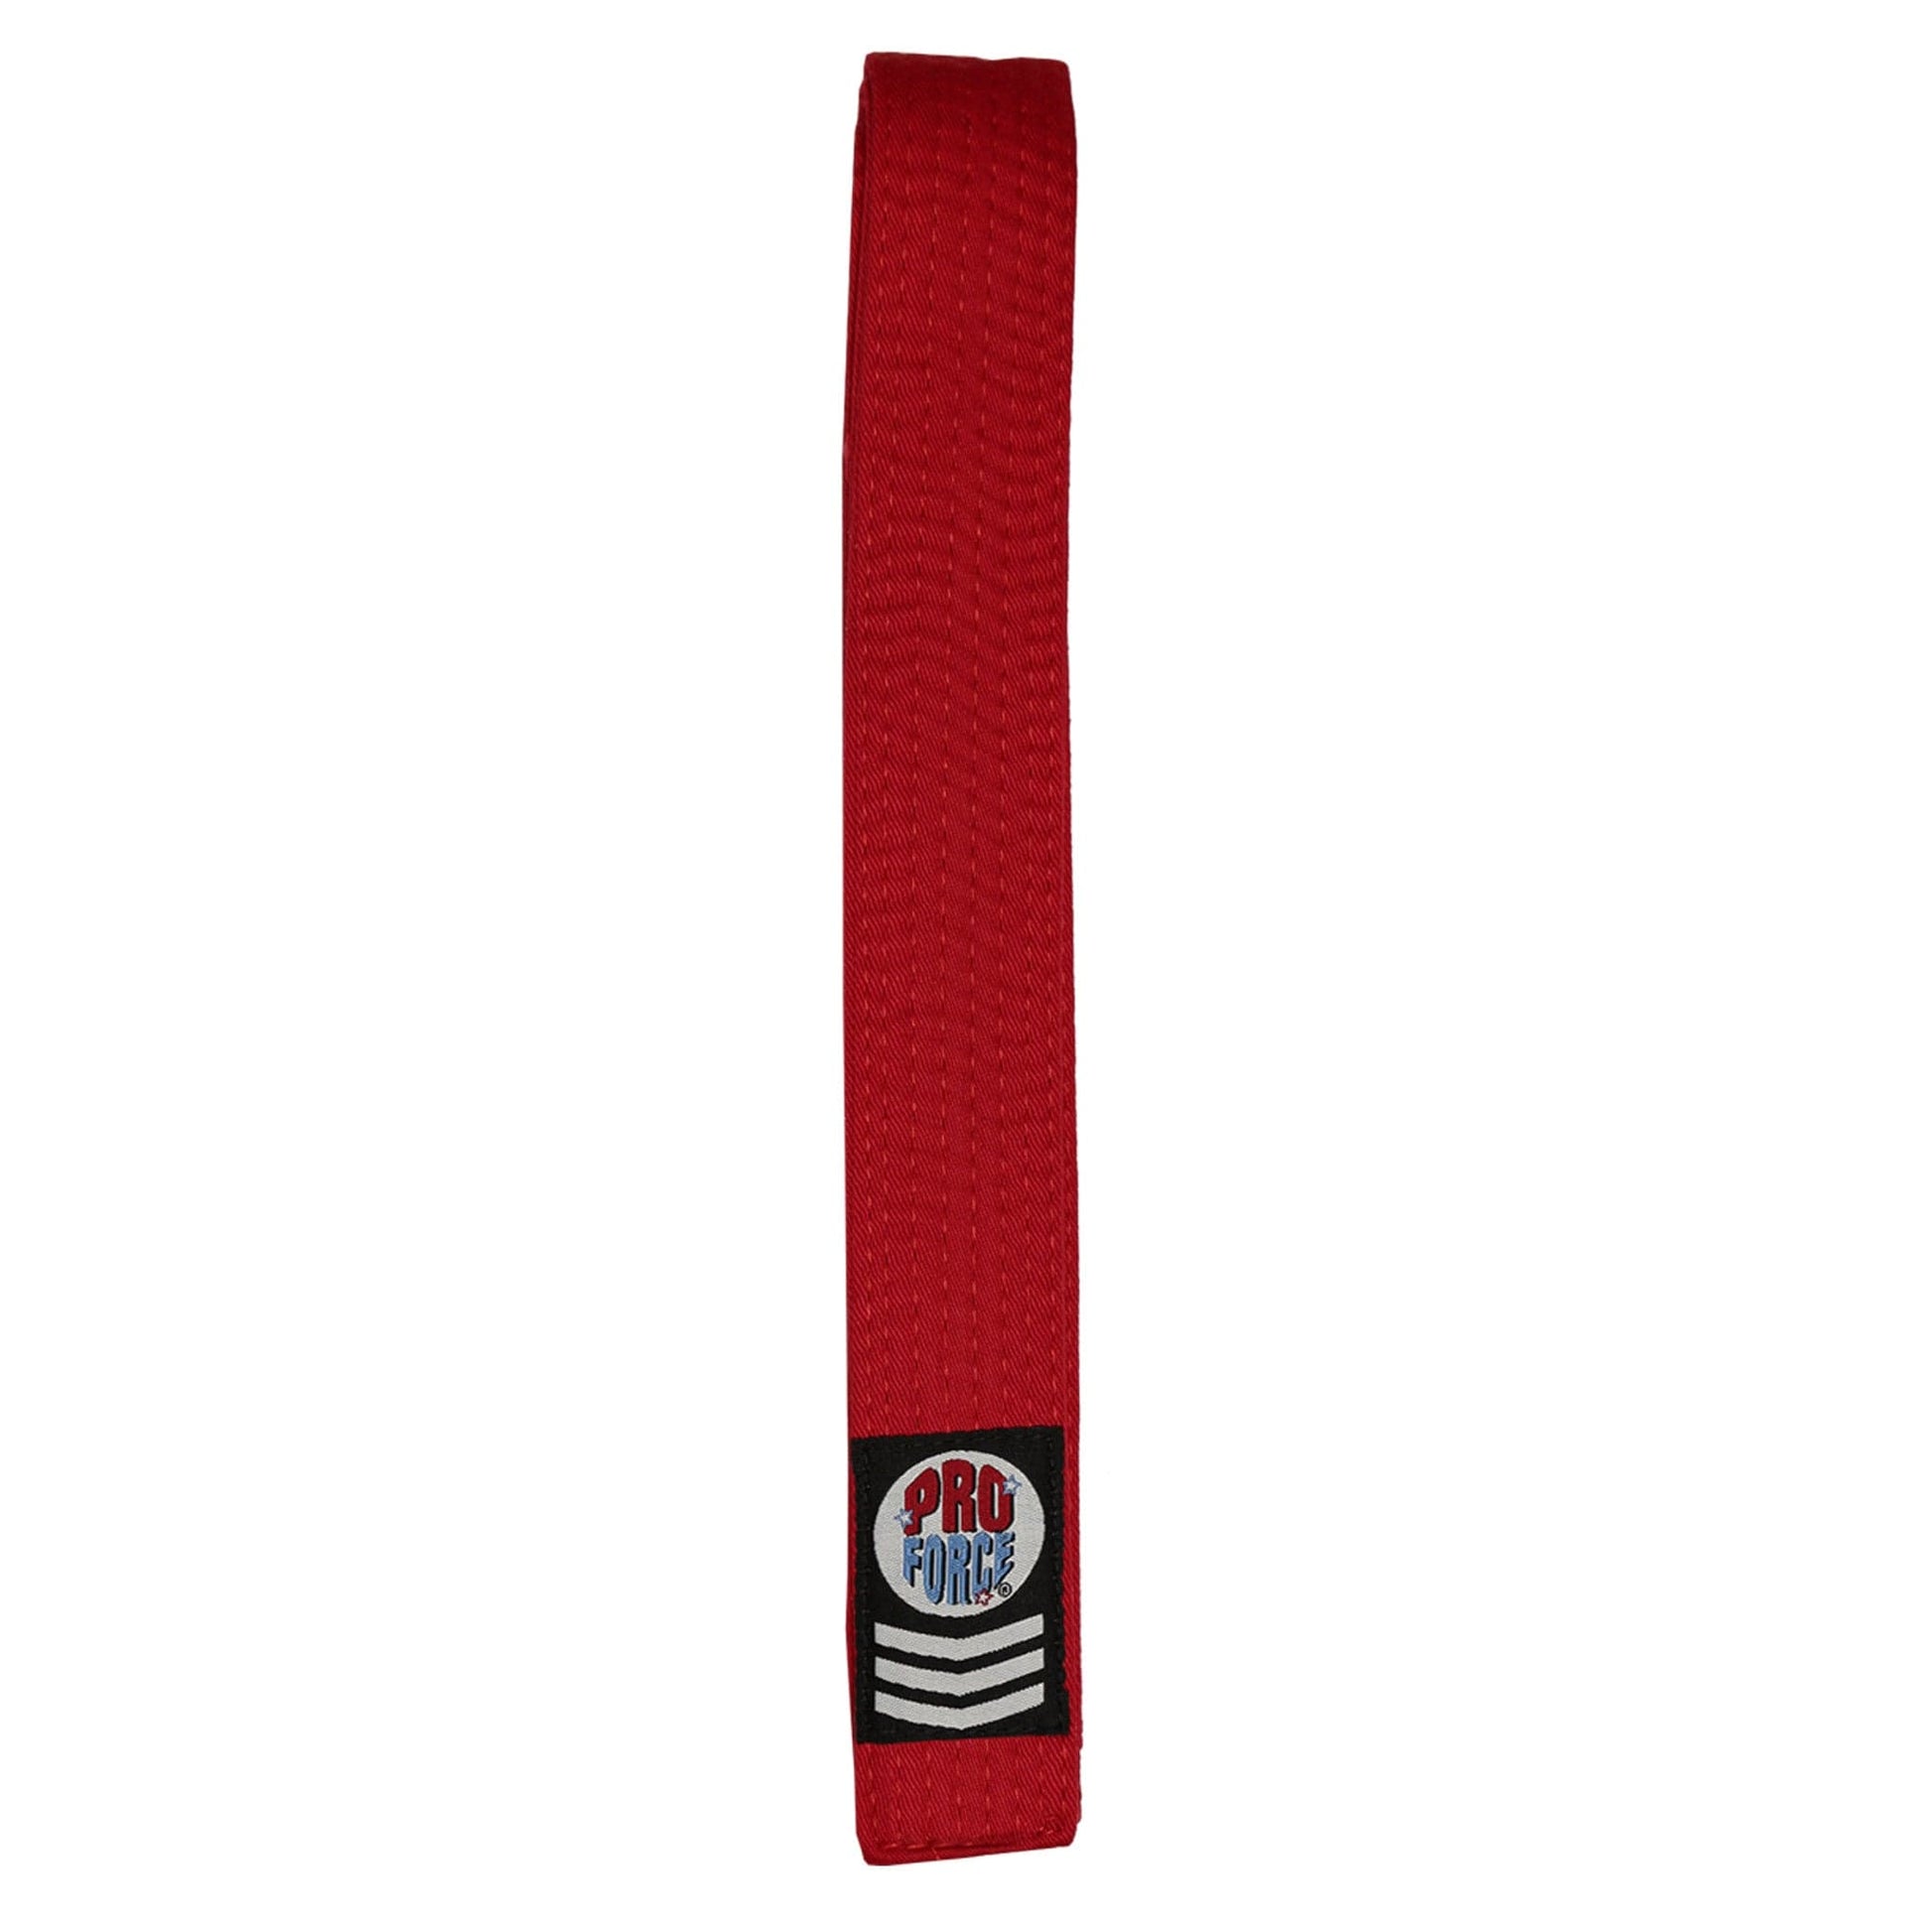 EclipseMartialArtsSupplies sporting goods Red / 0 child small ProForce Gladiator 1.75 inch wide Double Wrap Karate Belts